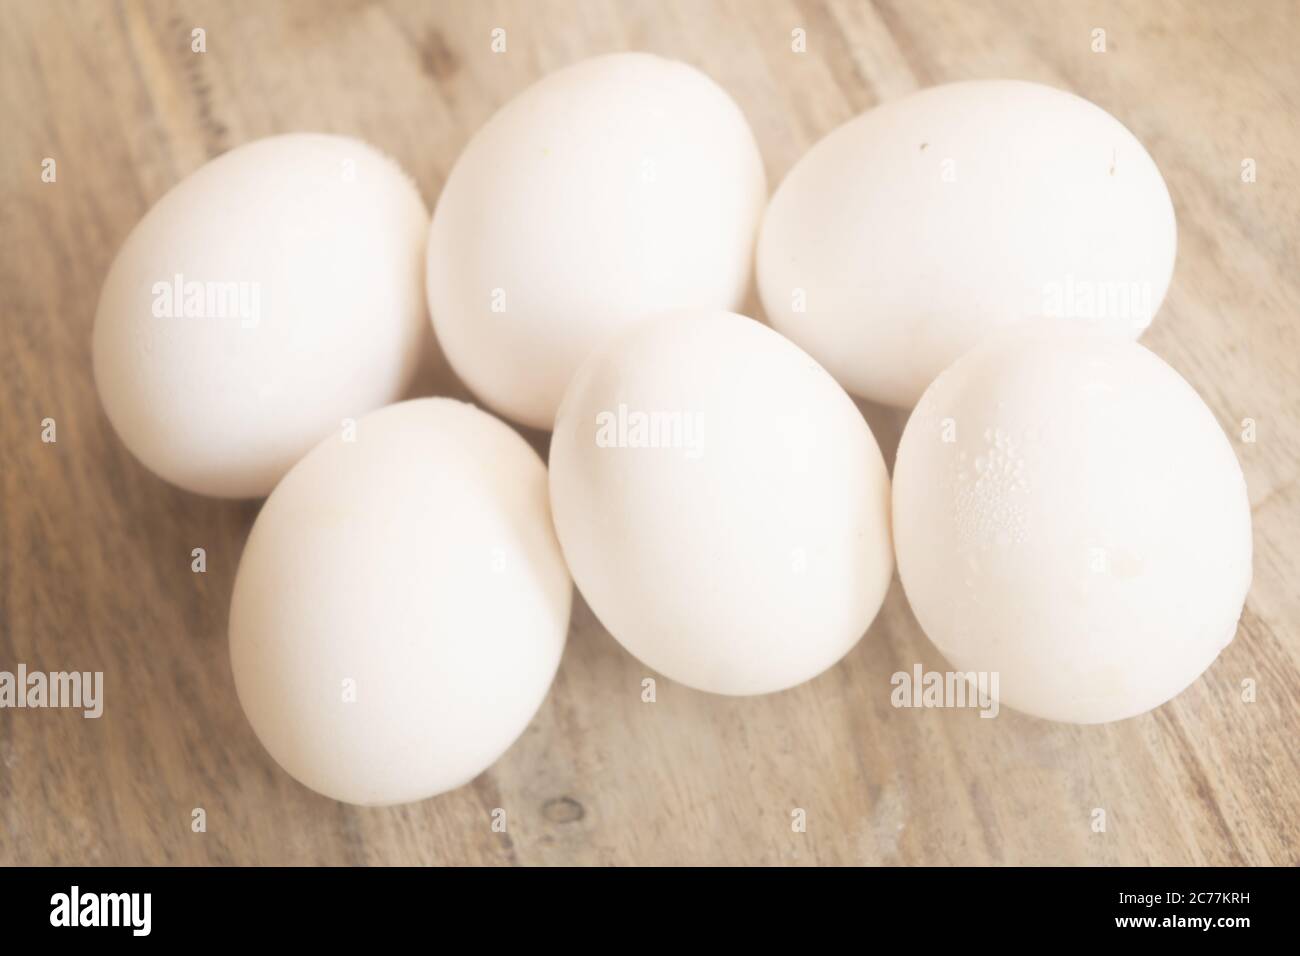 fresh eggs from free-range laying hens being housed Stock Photo